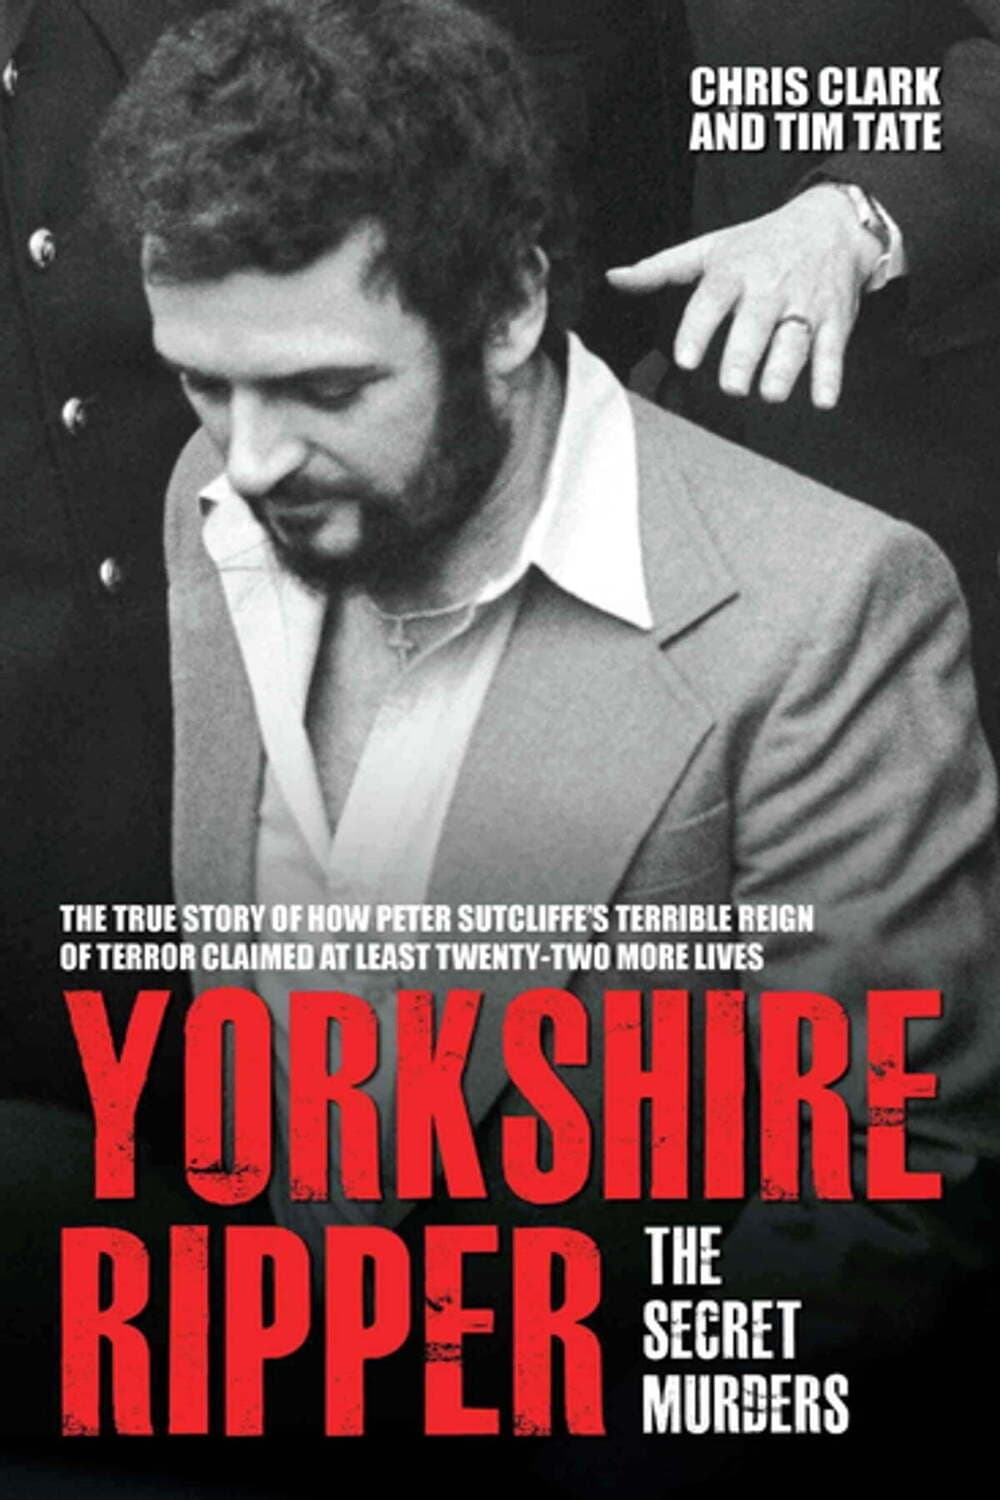 Yorkshire Ripper: The Secret Murders TV Shows About Serial Killer